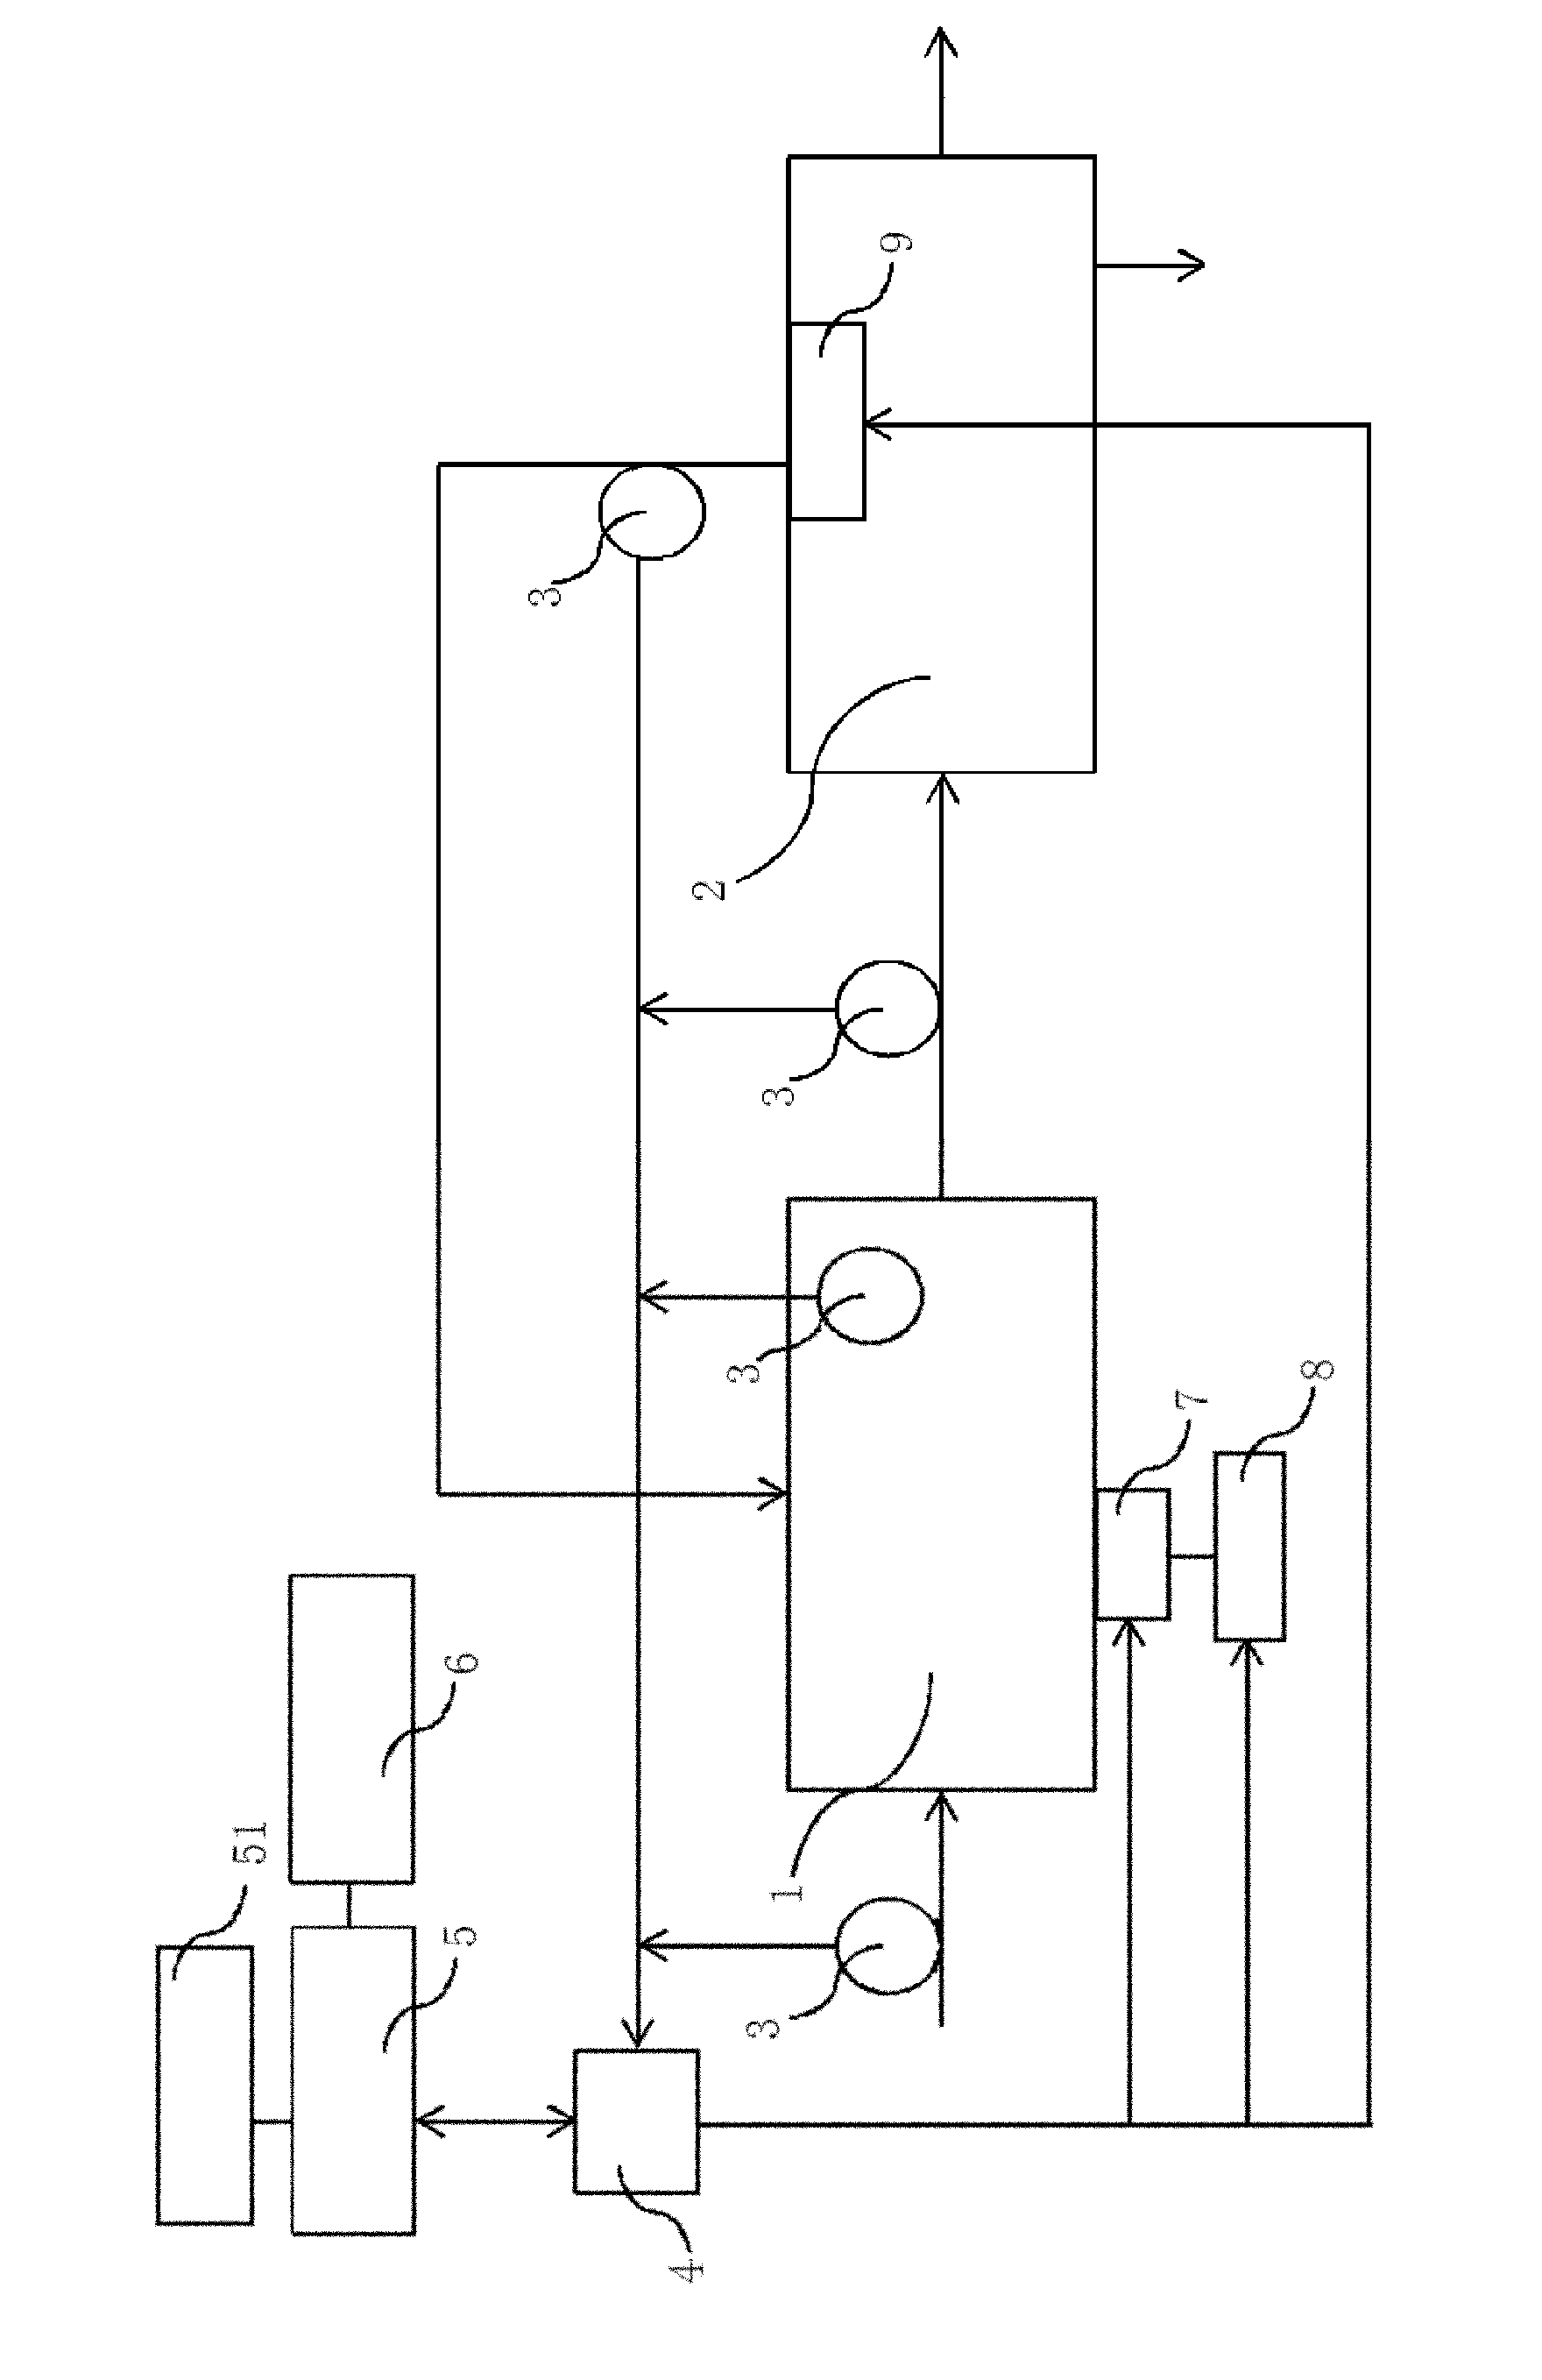 Method for controlling aeration in biochemical reaction tank in real time